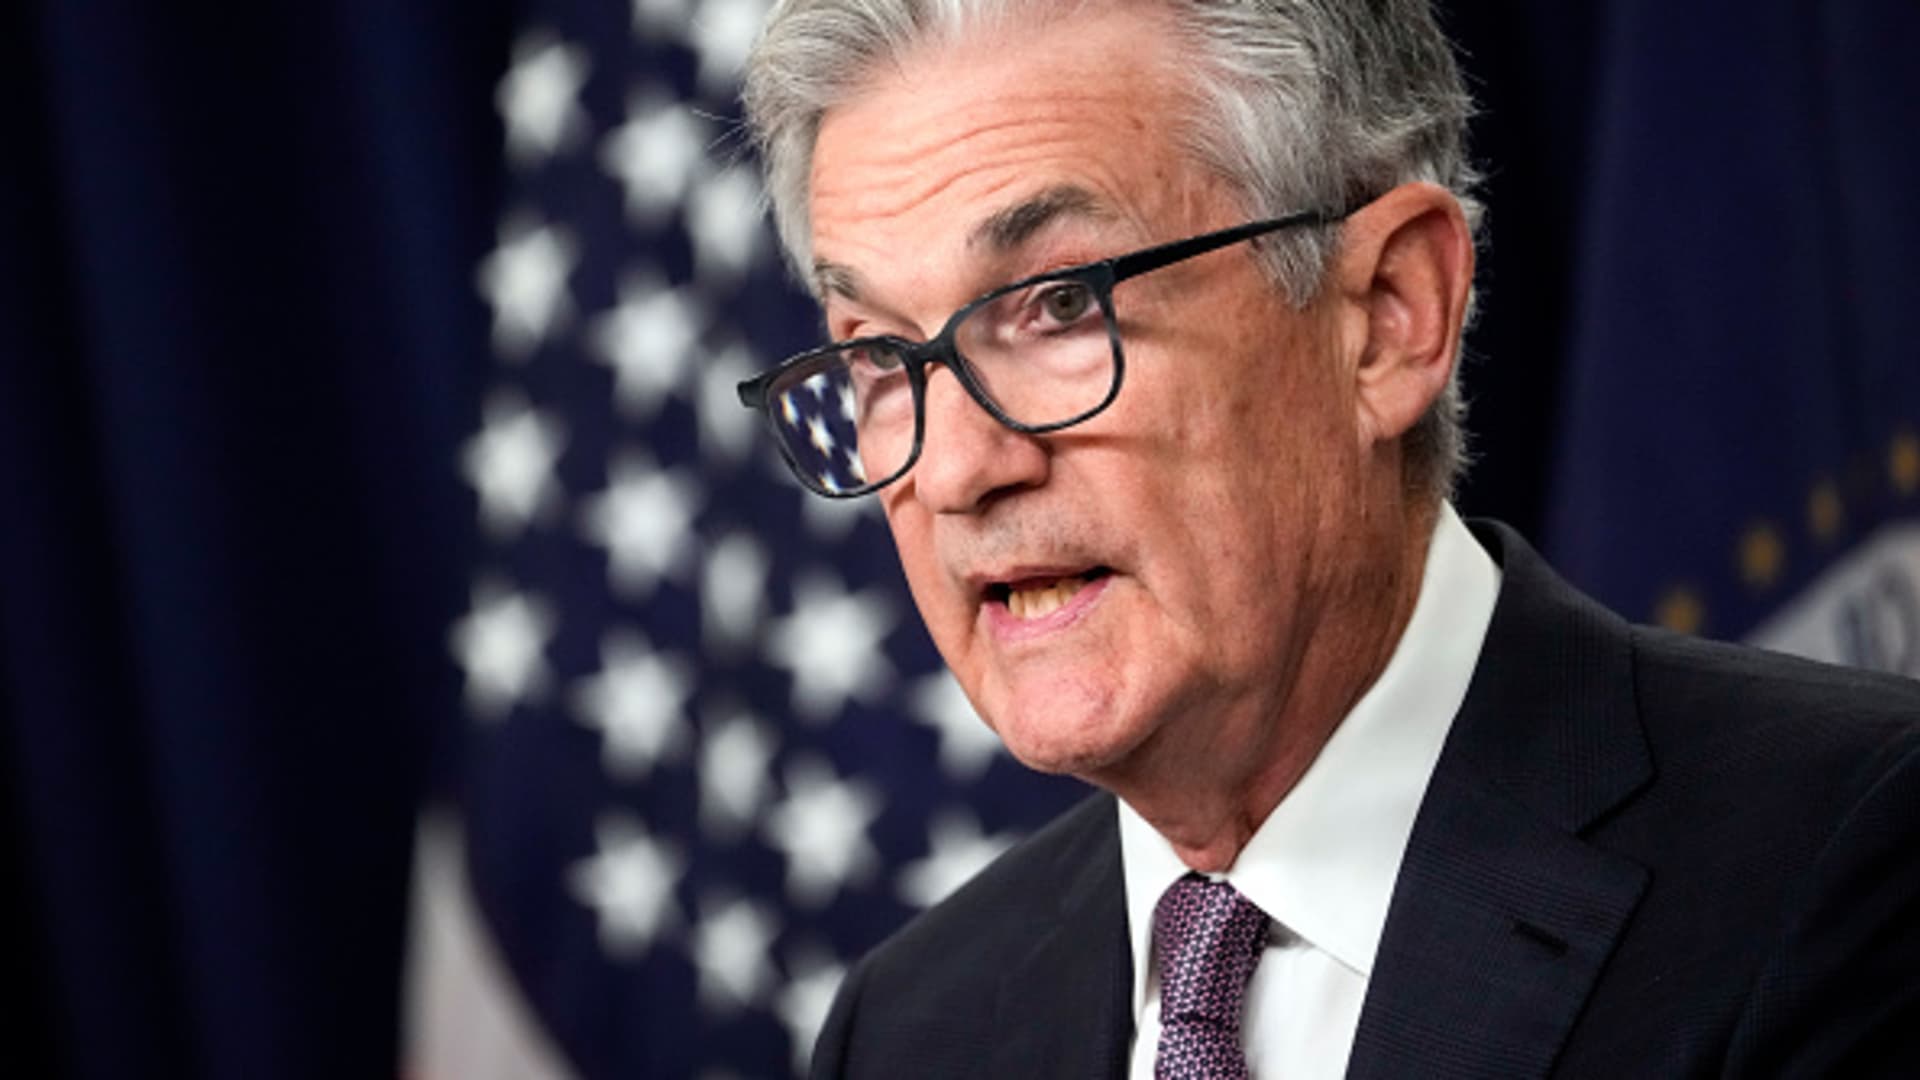 The Fed just made a 'jumbo' interest rate hike of 0.75%—here are 4 things that will be more expensive